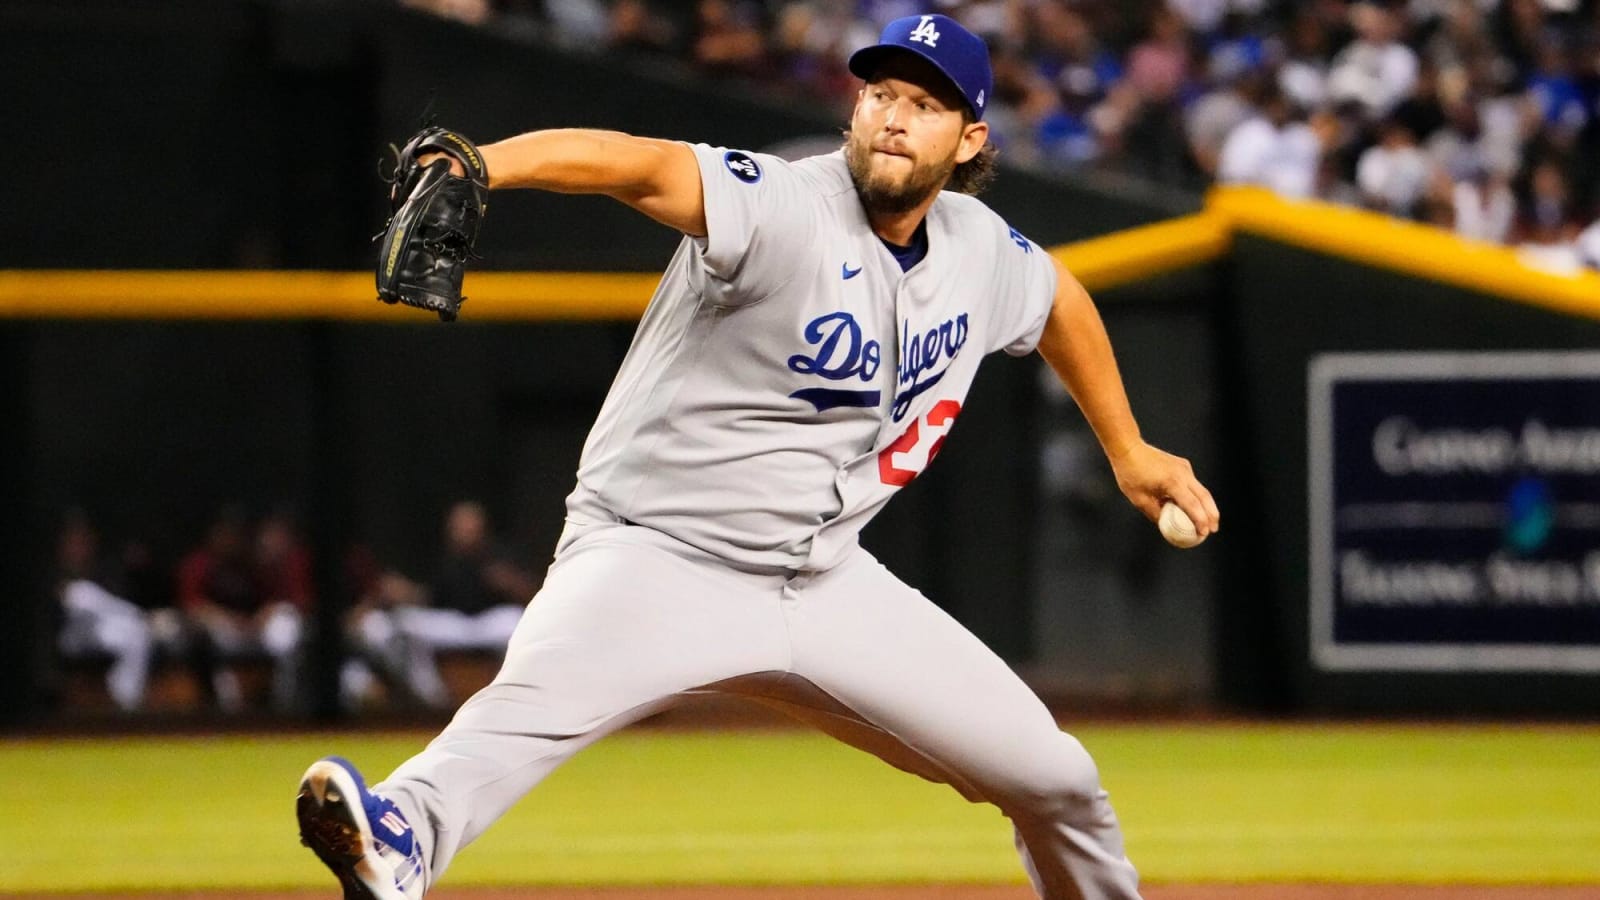 Clayton Kershaw: Dodgers’ 2013 Pool Party At Chase Field Wasn’t Meant To Be ‘Disrespectful’